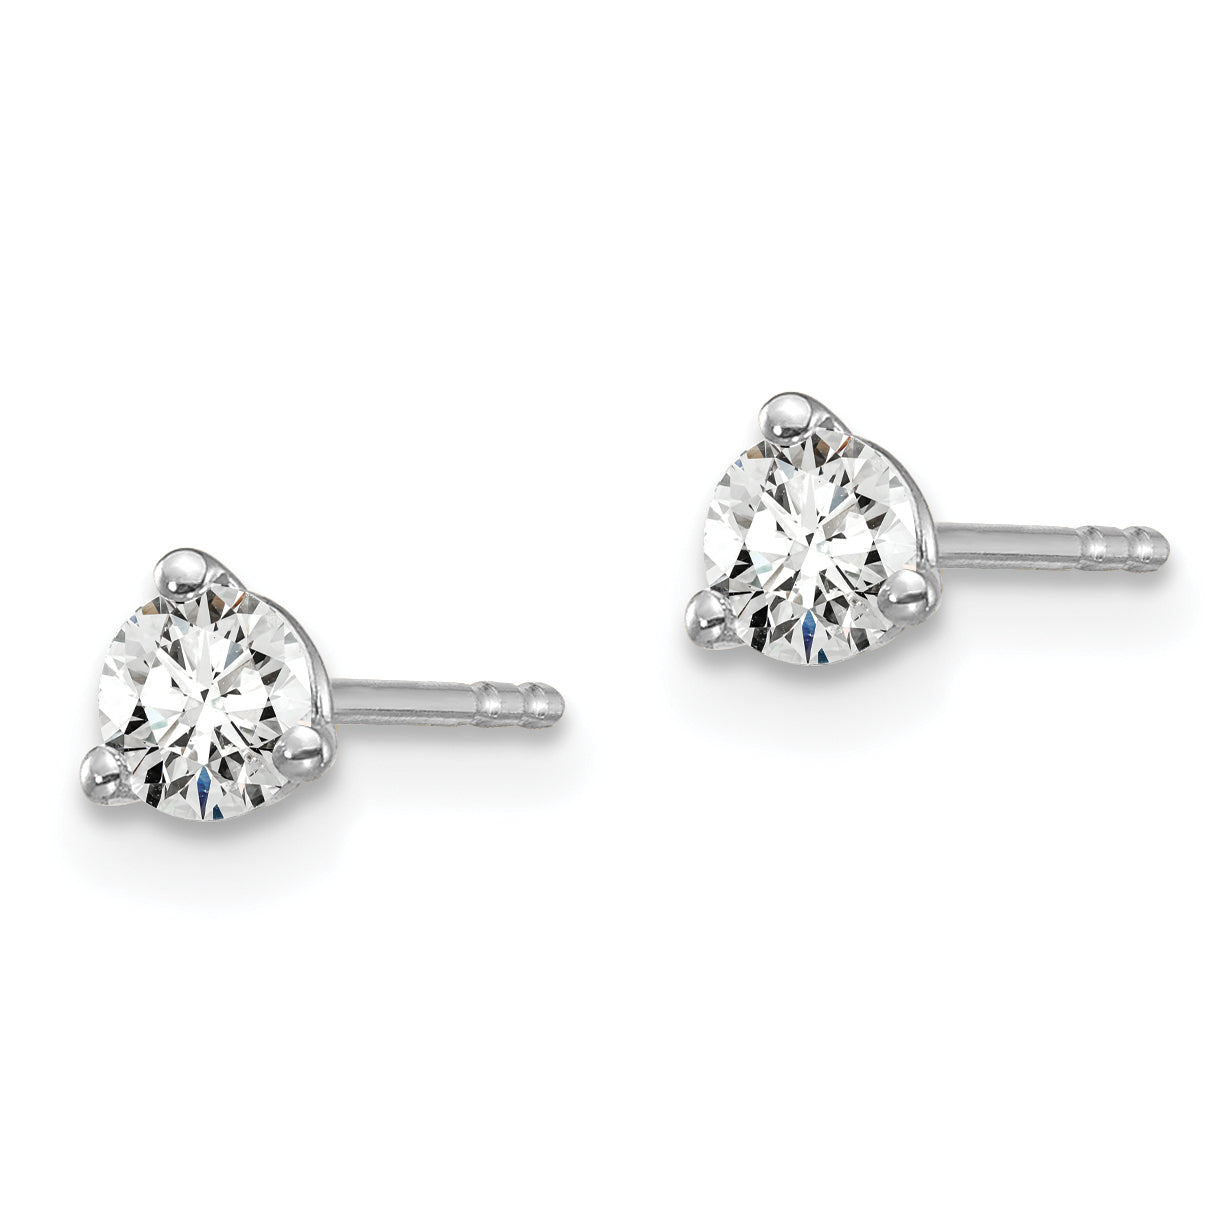 14k White Gold 3/8 carat total weight Round VS/SI DEF Lab Grown Diamond 3 Prong Stud Post Earrings